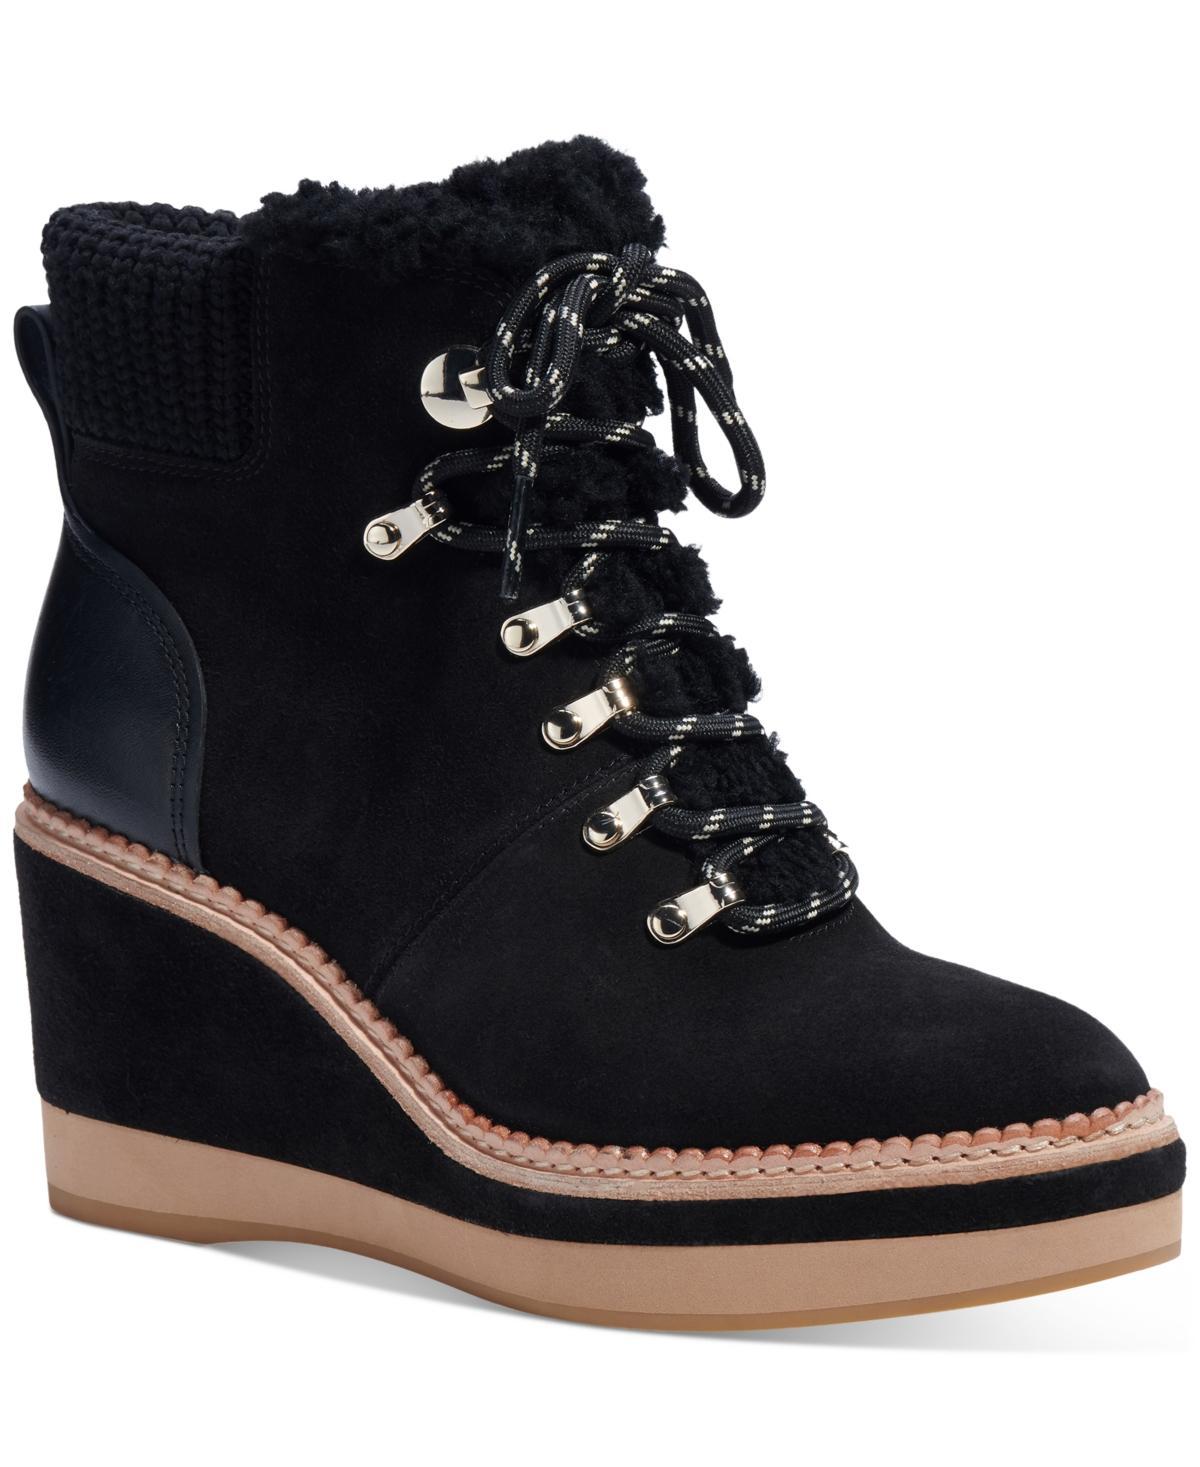 Womens Willow Suede Wedge Booties Product Image